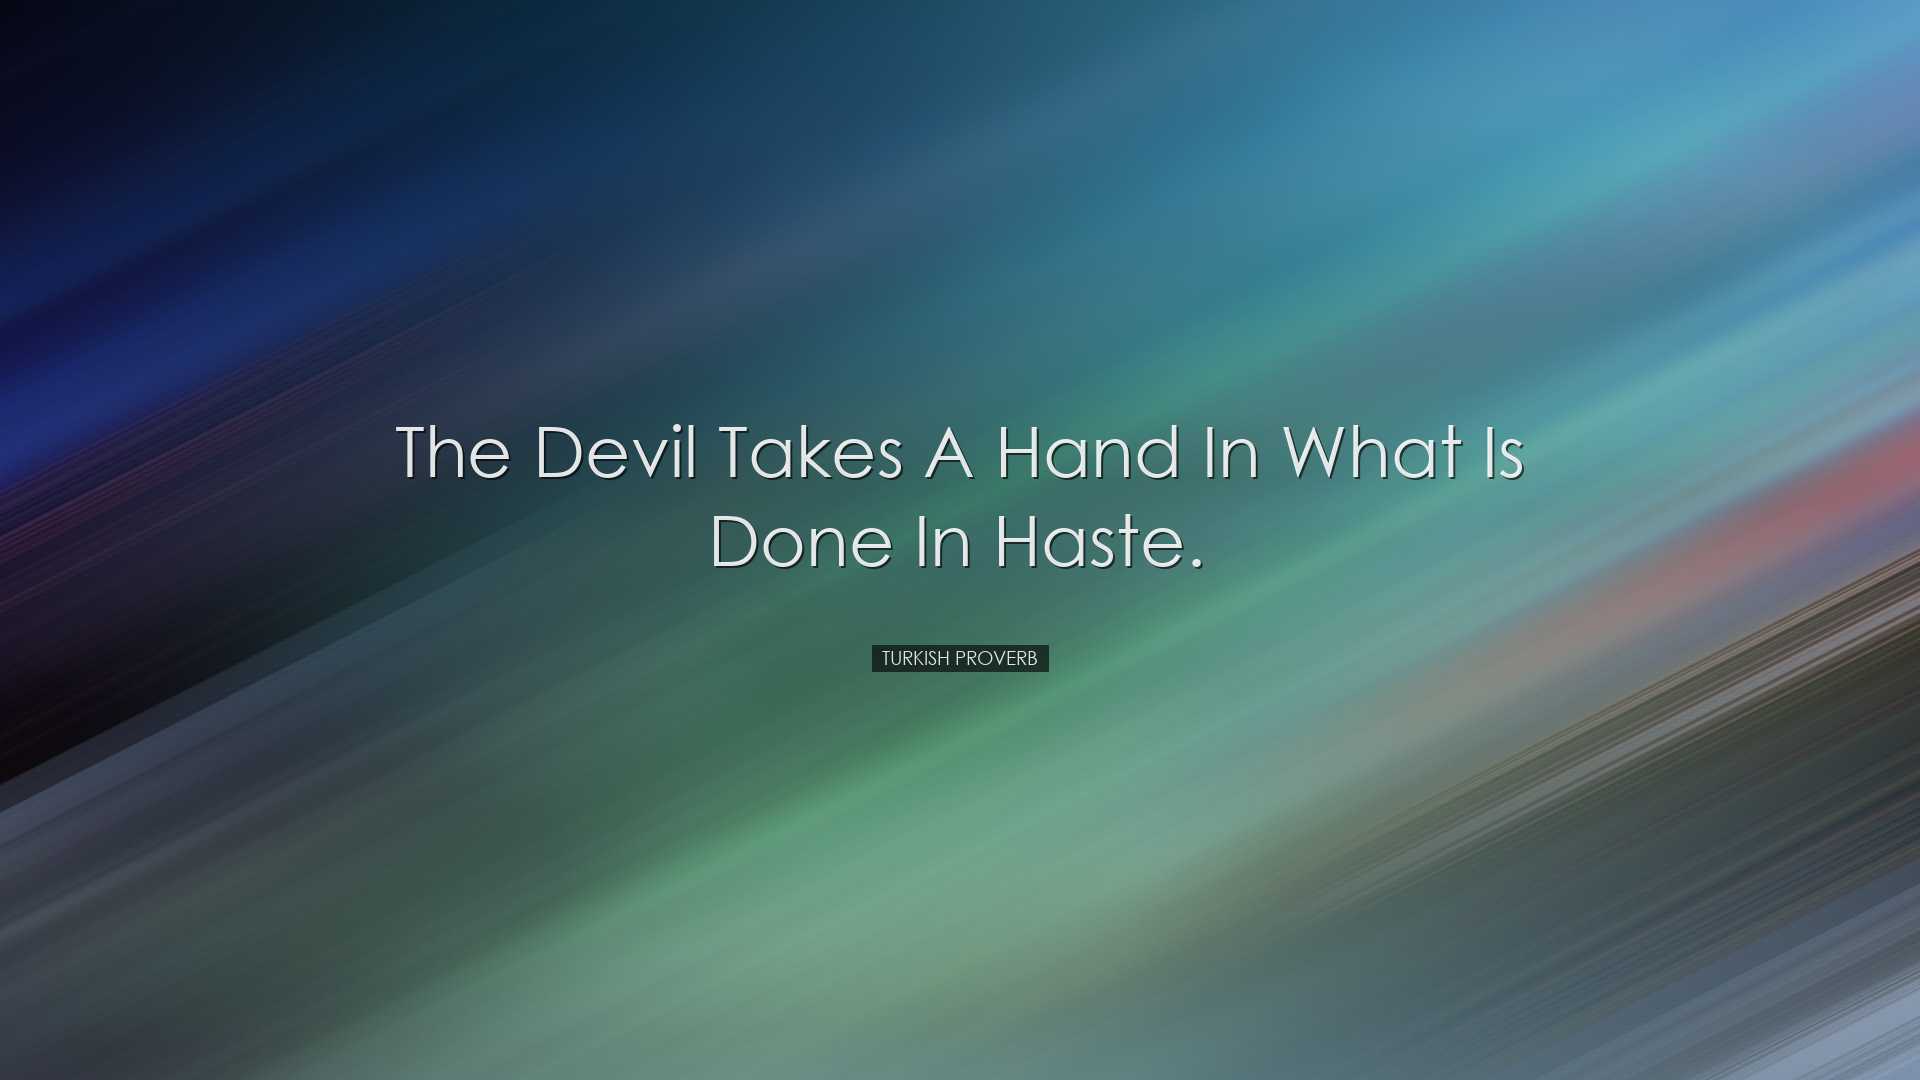 The devil takes a hand in what is done in haste. - Turkish Proverb